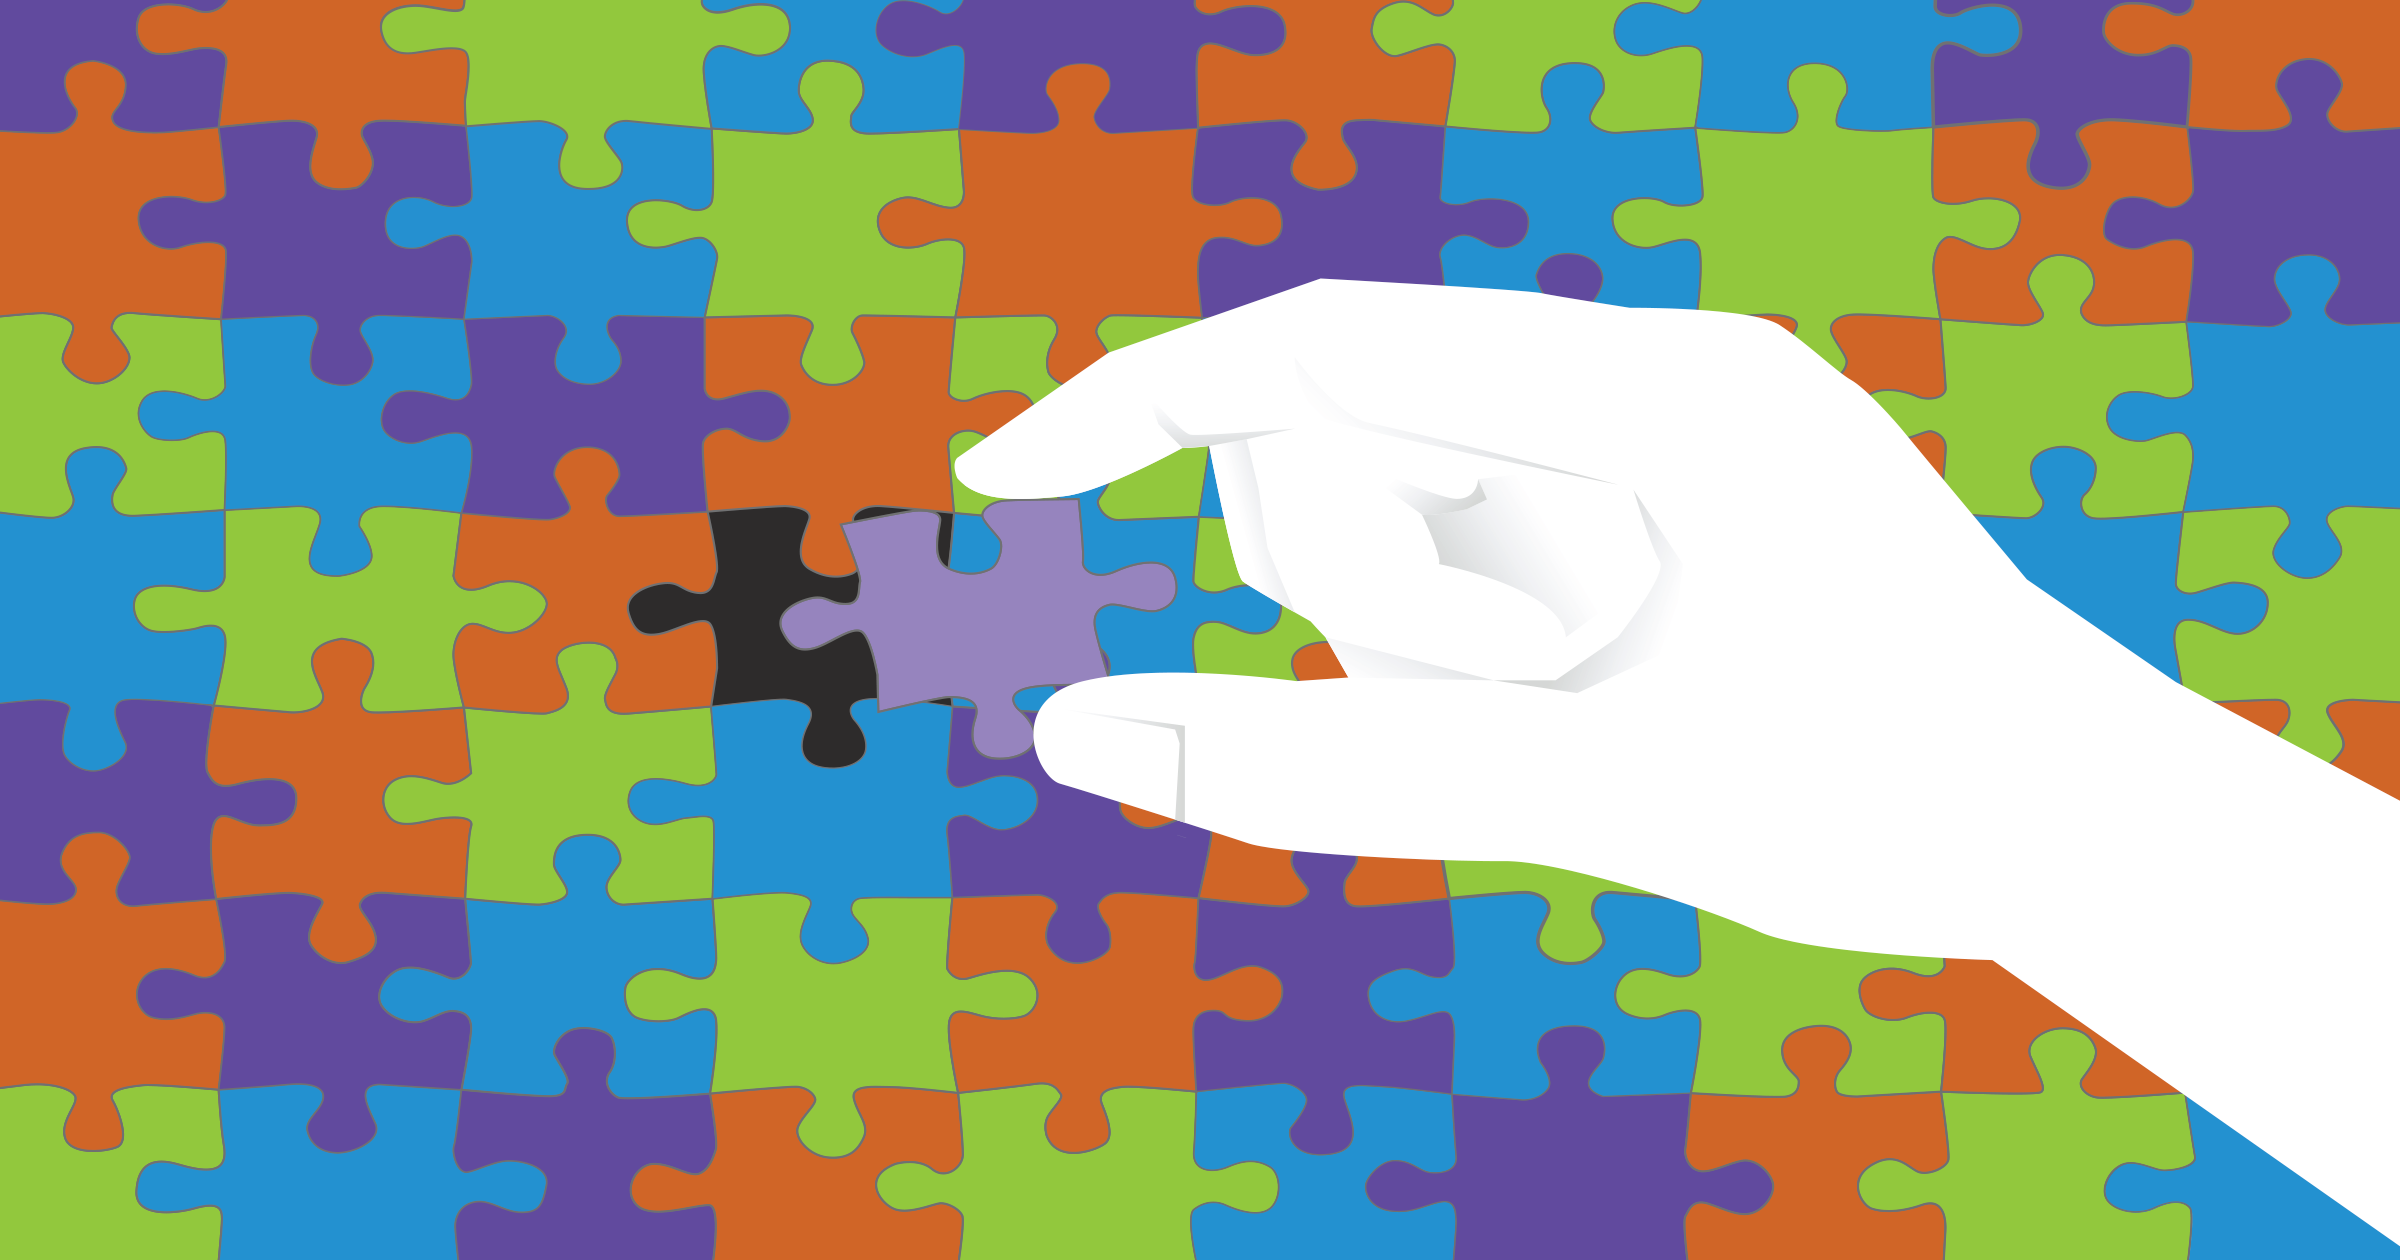 A puzzle with multicolored pieces, and a hand placing the final piece in place